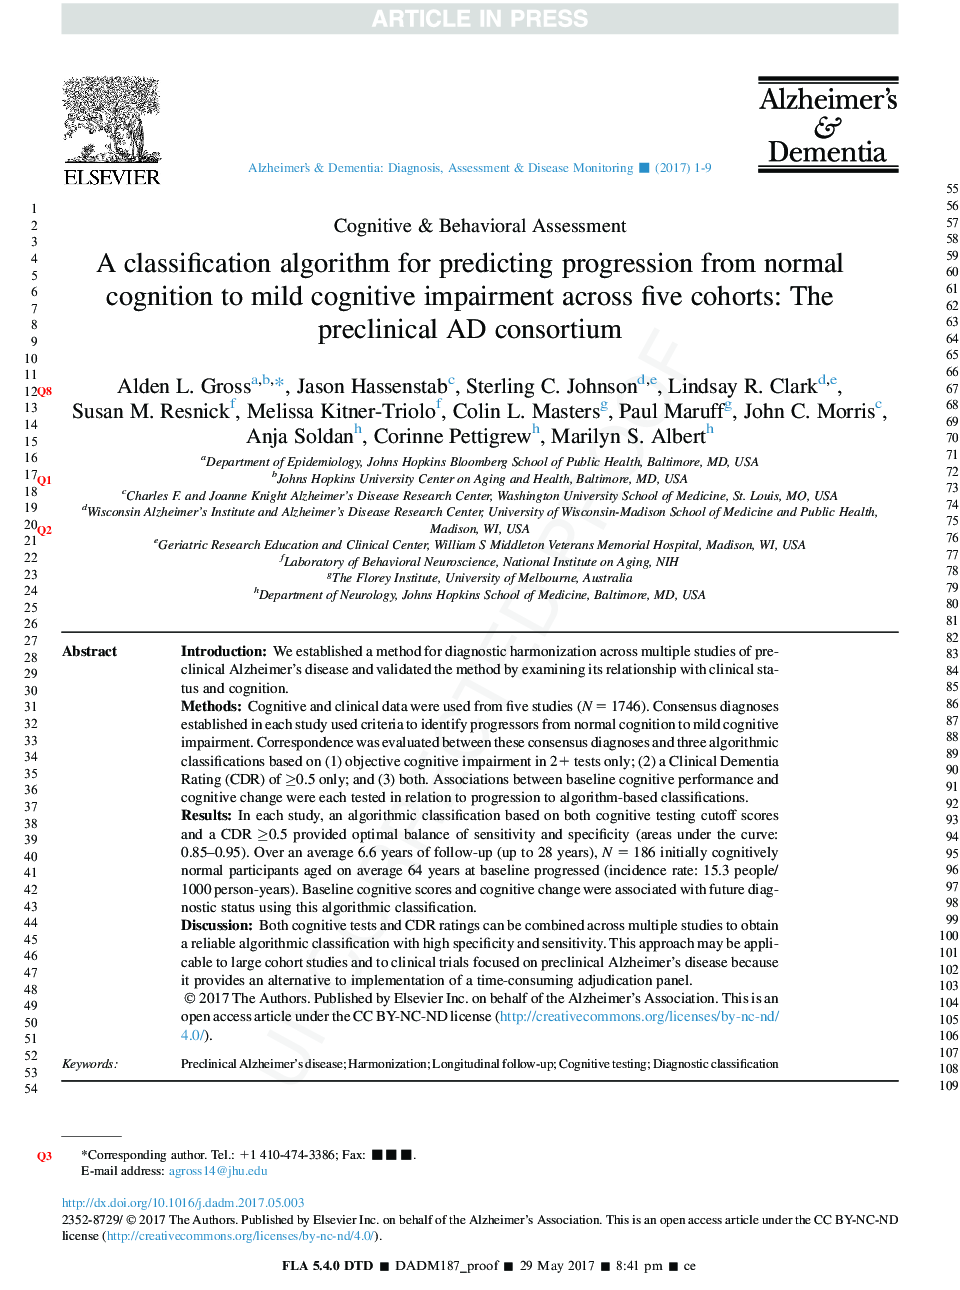 A classification algorithm for predicting progression from normal cognition to mild cognitive impairment across five cohorts: The preclinical AD consortium